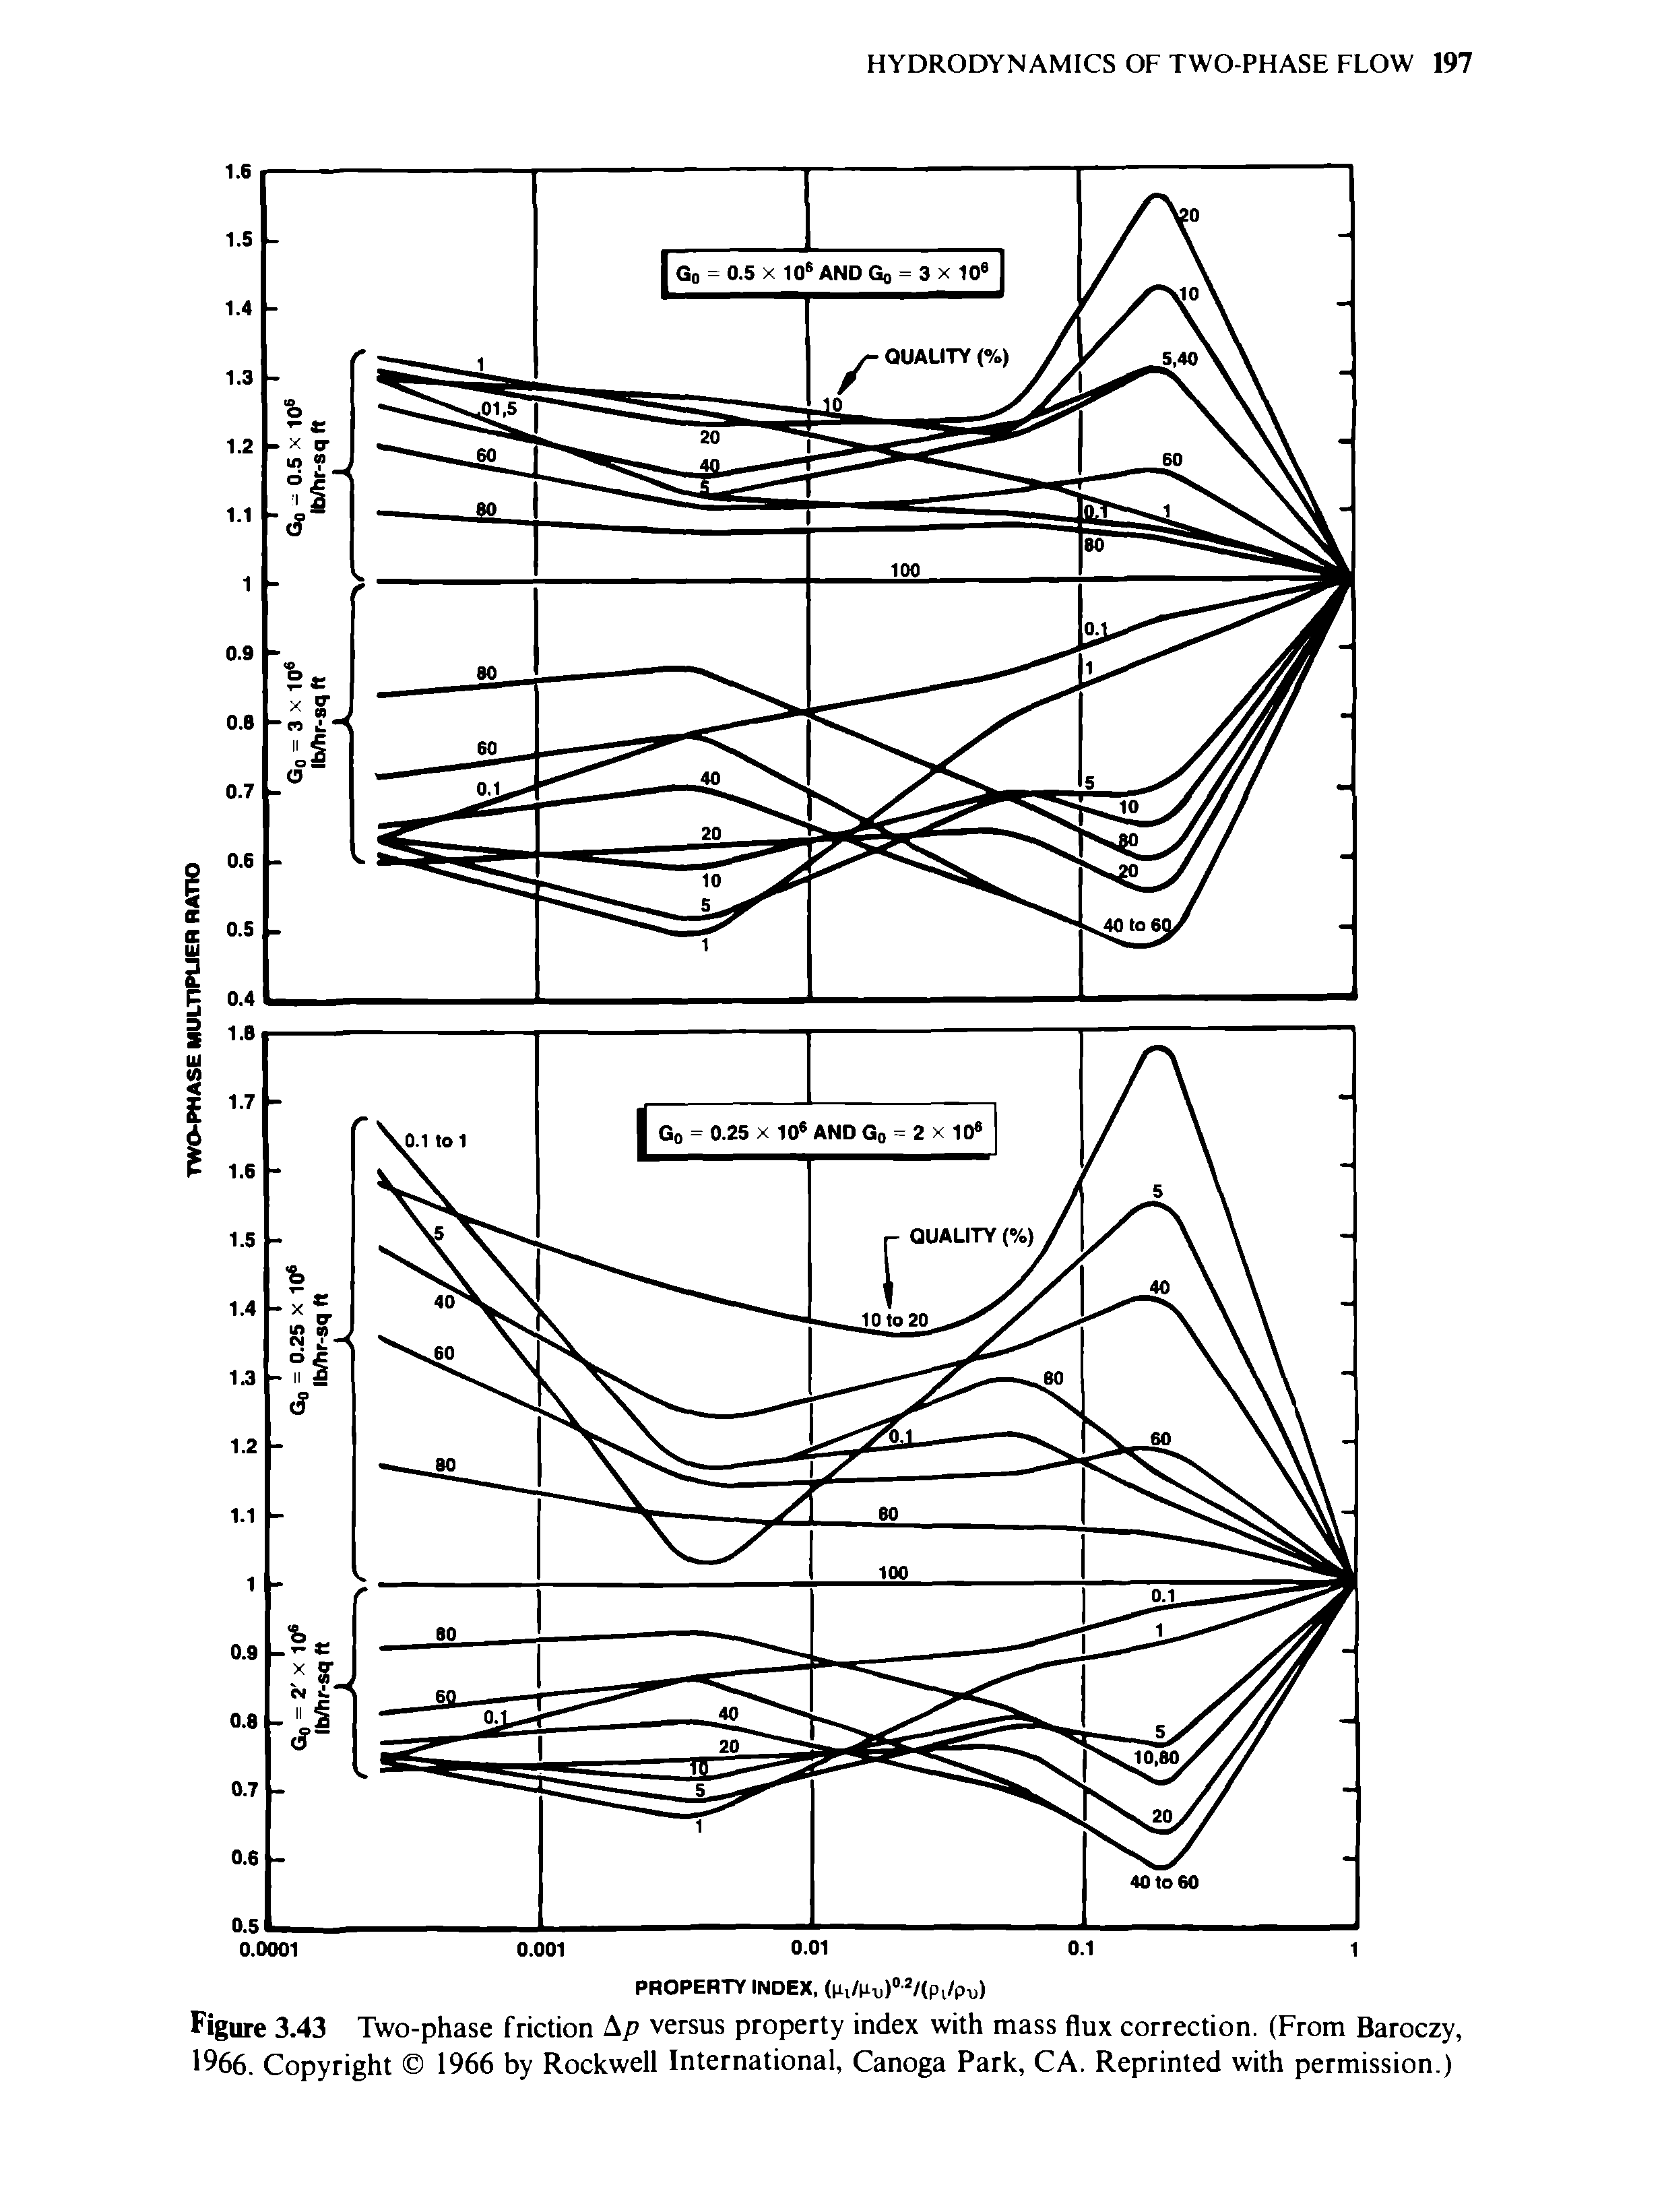 Figure 3.43 Two-phase friction Ap versus property index with mass flux correction. (From Baroczy, 1966. Copyright 1966 by Rockwell International, Canoga Park, CA. Reprinted with permission.)...